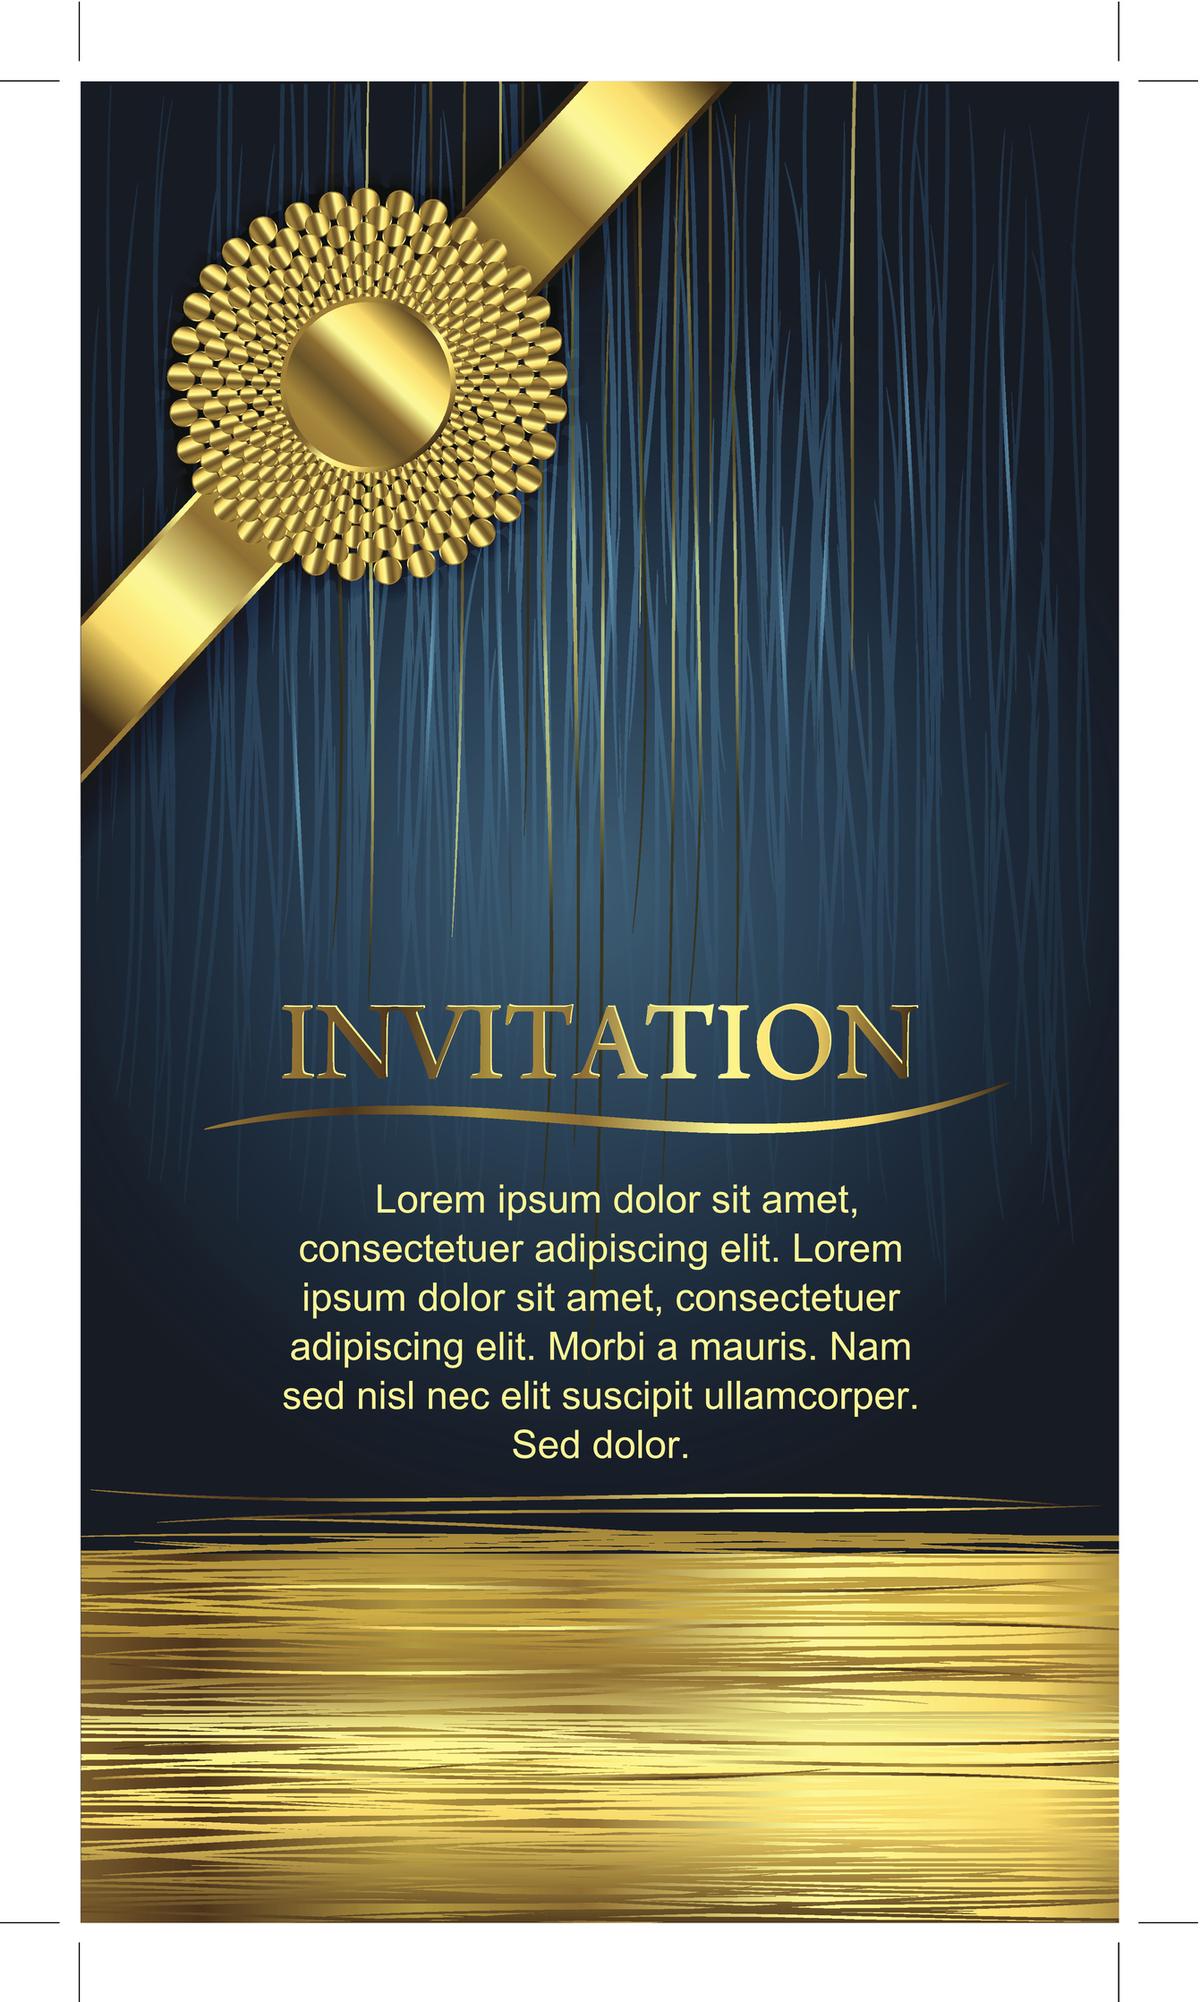 birthday invitation message for adults Quotesgram wording | Friend